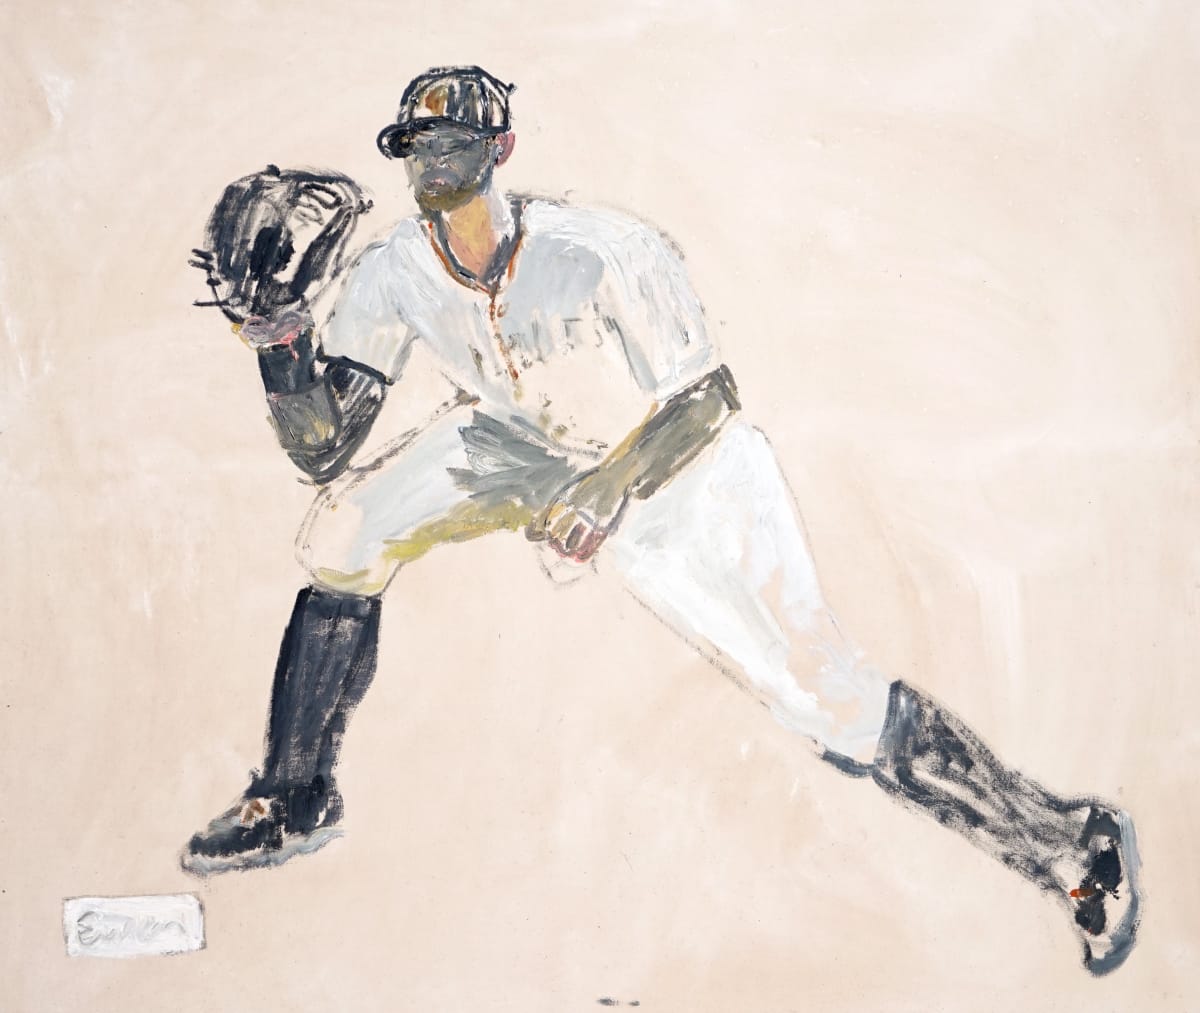 First Baseman  Image: Inspired by Brandon Belt of the San Francisco Gians